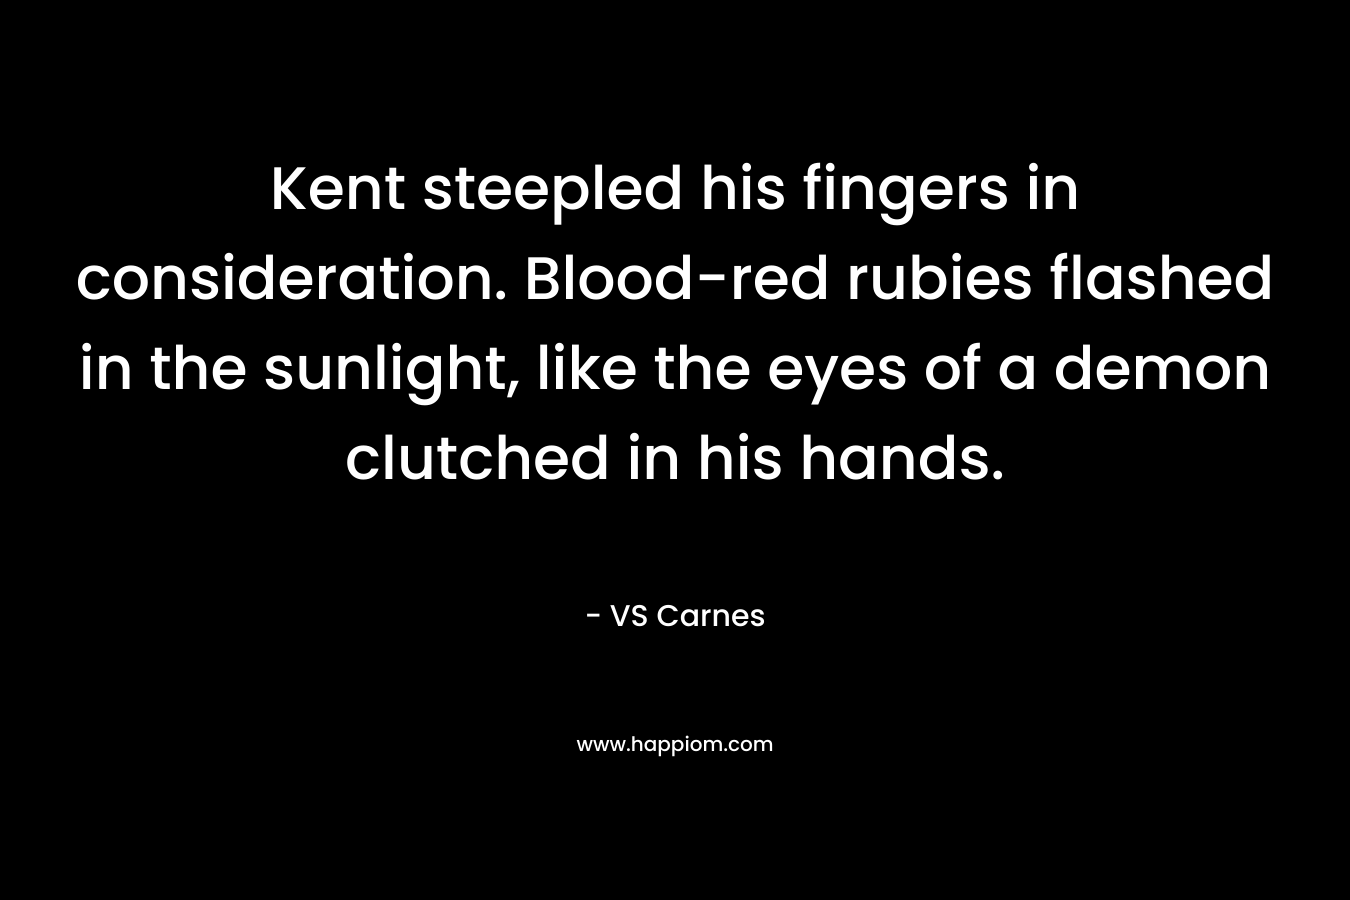 Kent steepled his fingers in consideration. Blood-red rubies flashed in the sunlight, like the eyes of a demon clutched in his hands.